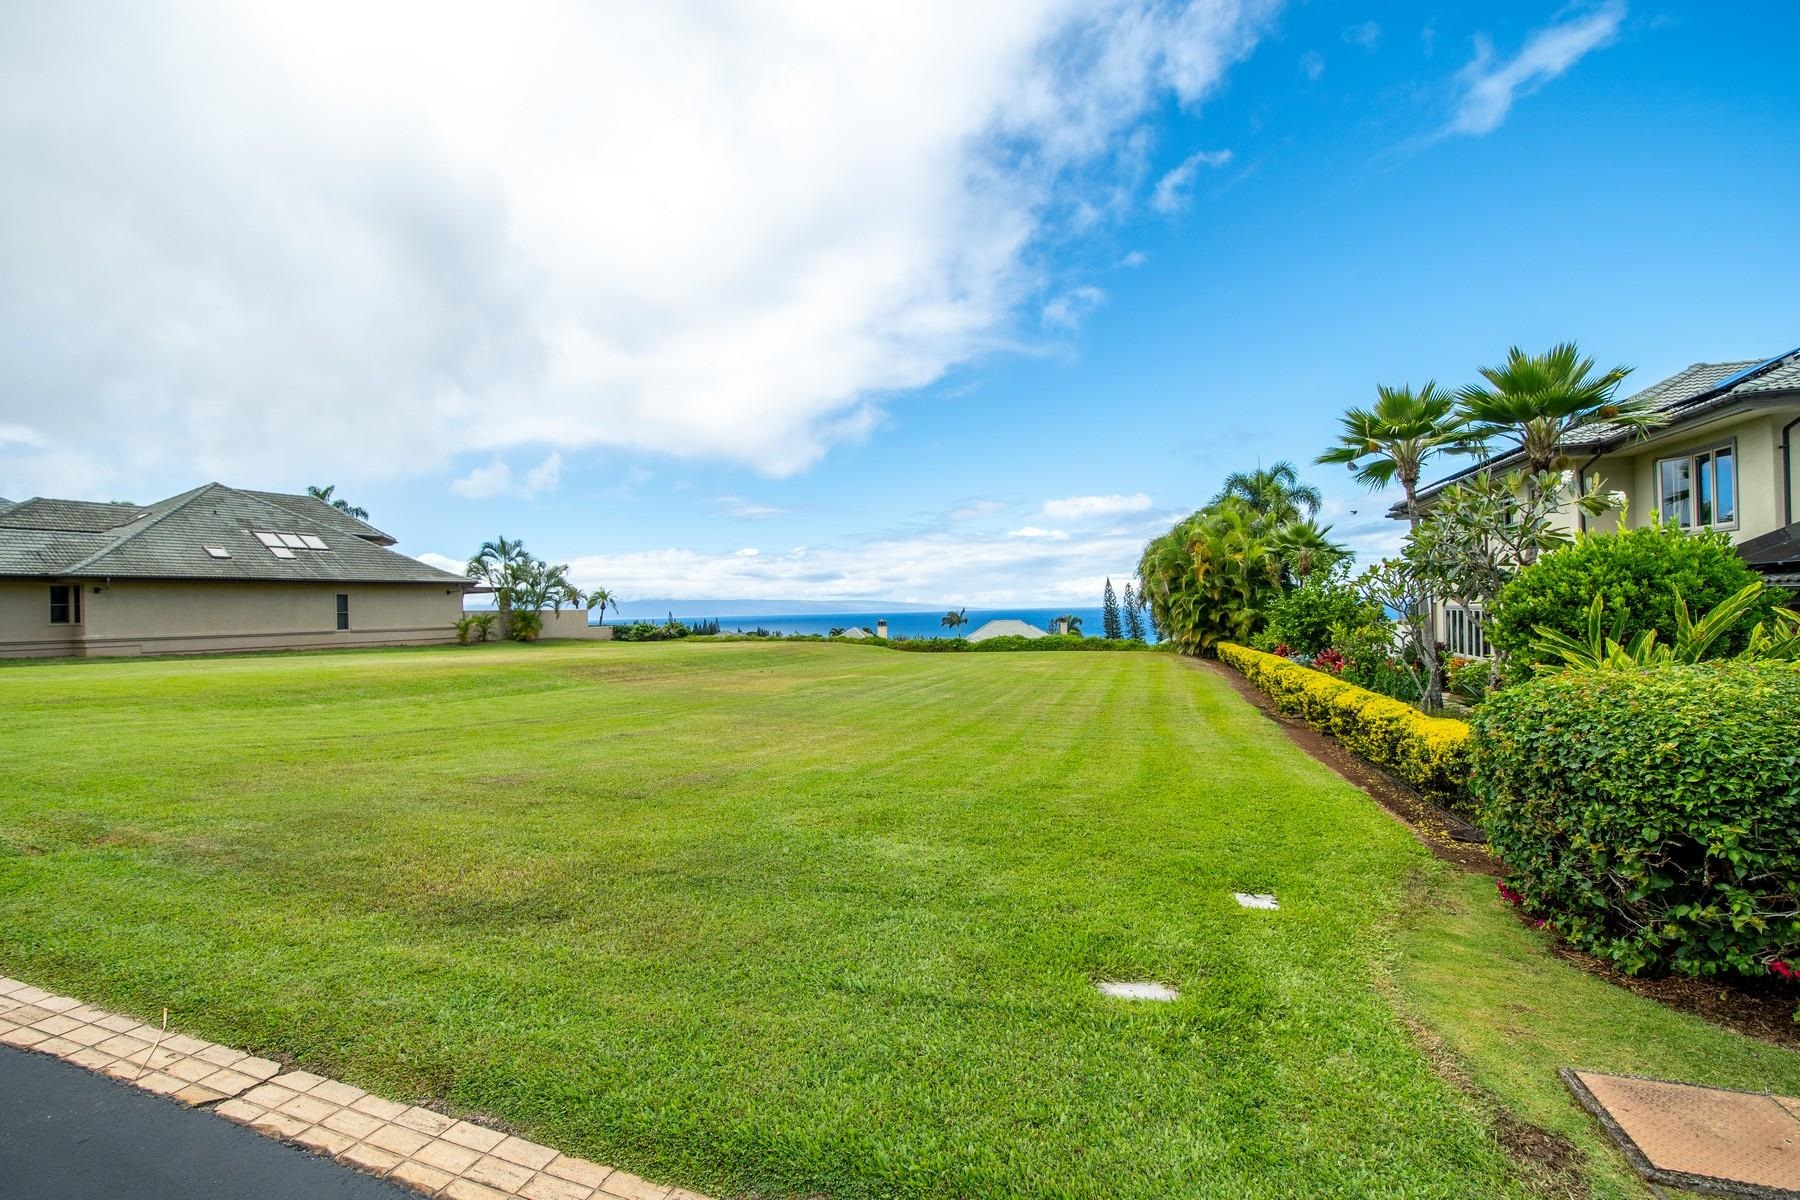 308 Cook Pine Dr 74 Lahaina, Hi vacant land for sale - photo 3 of 9